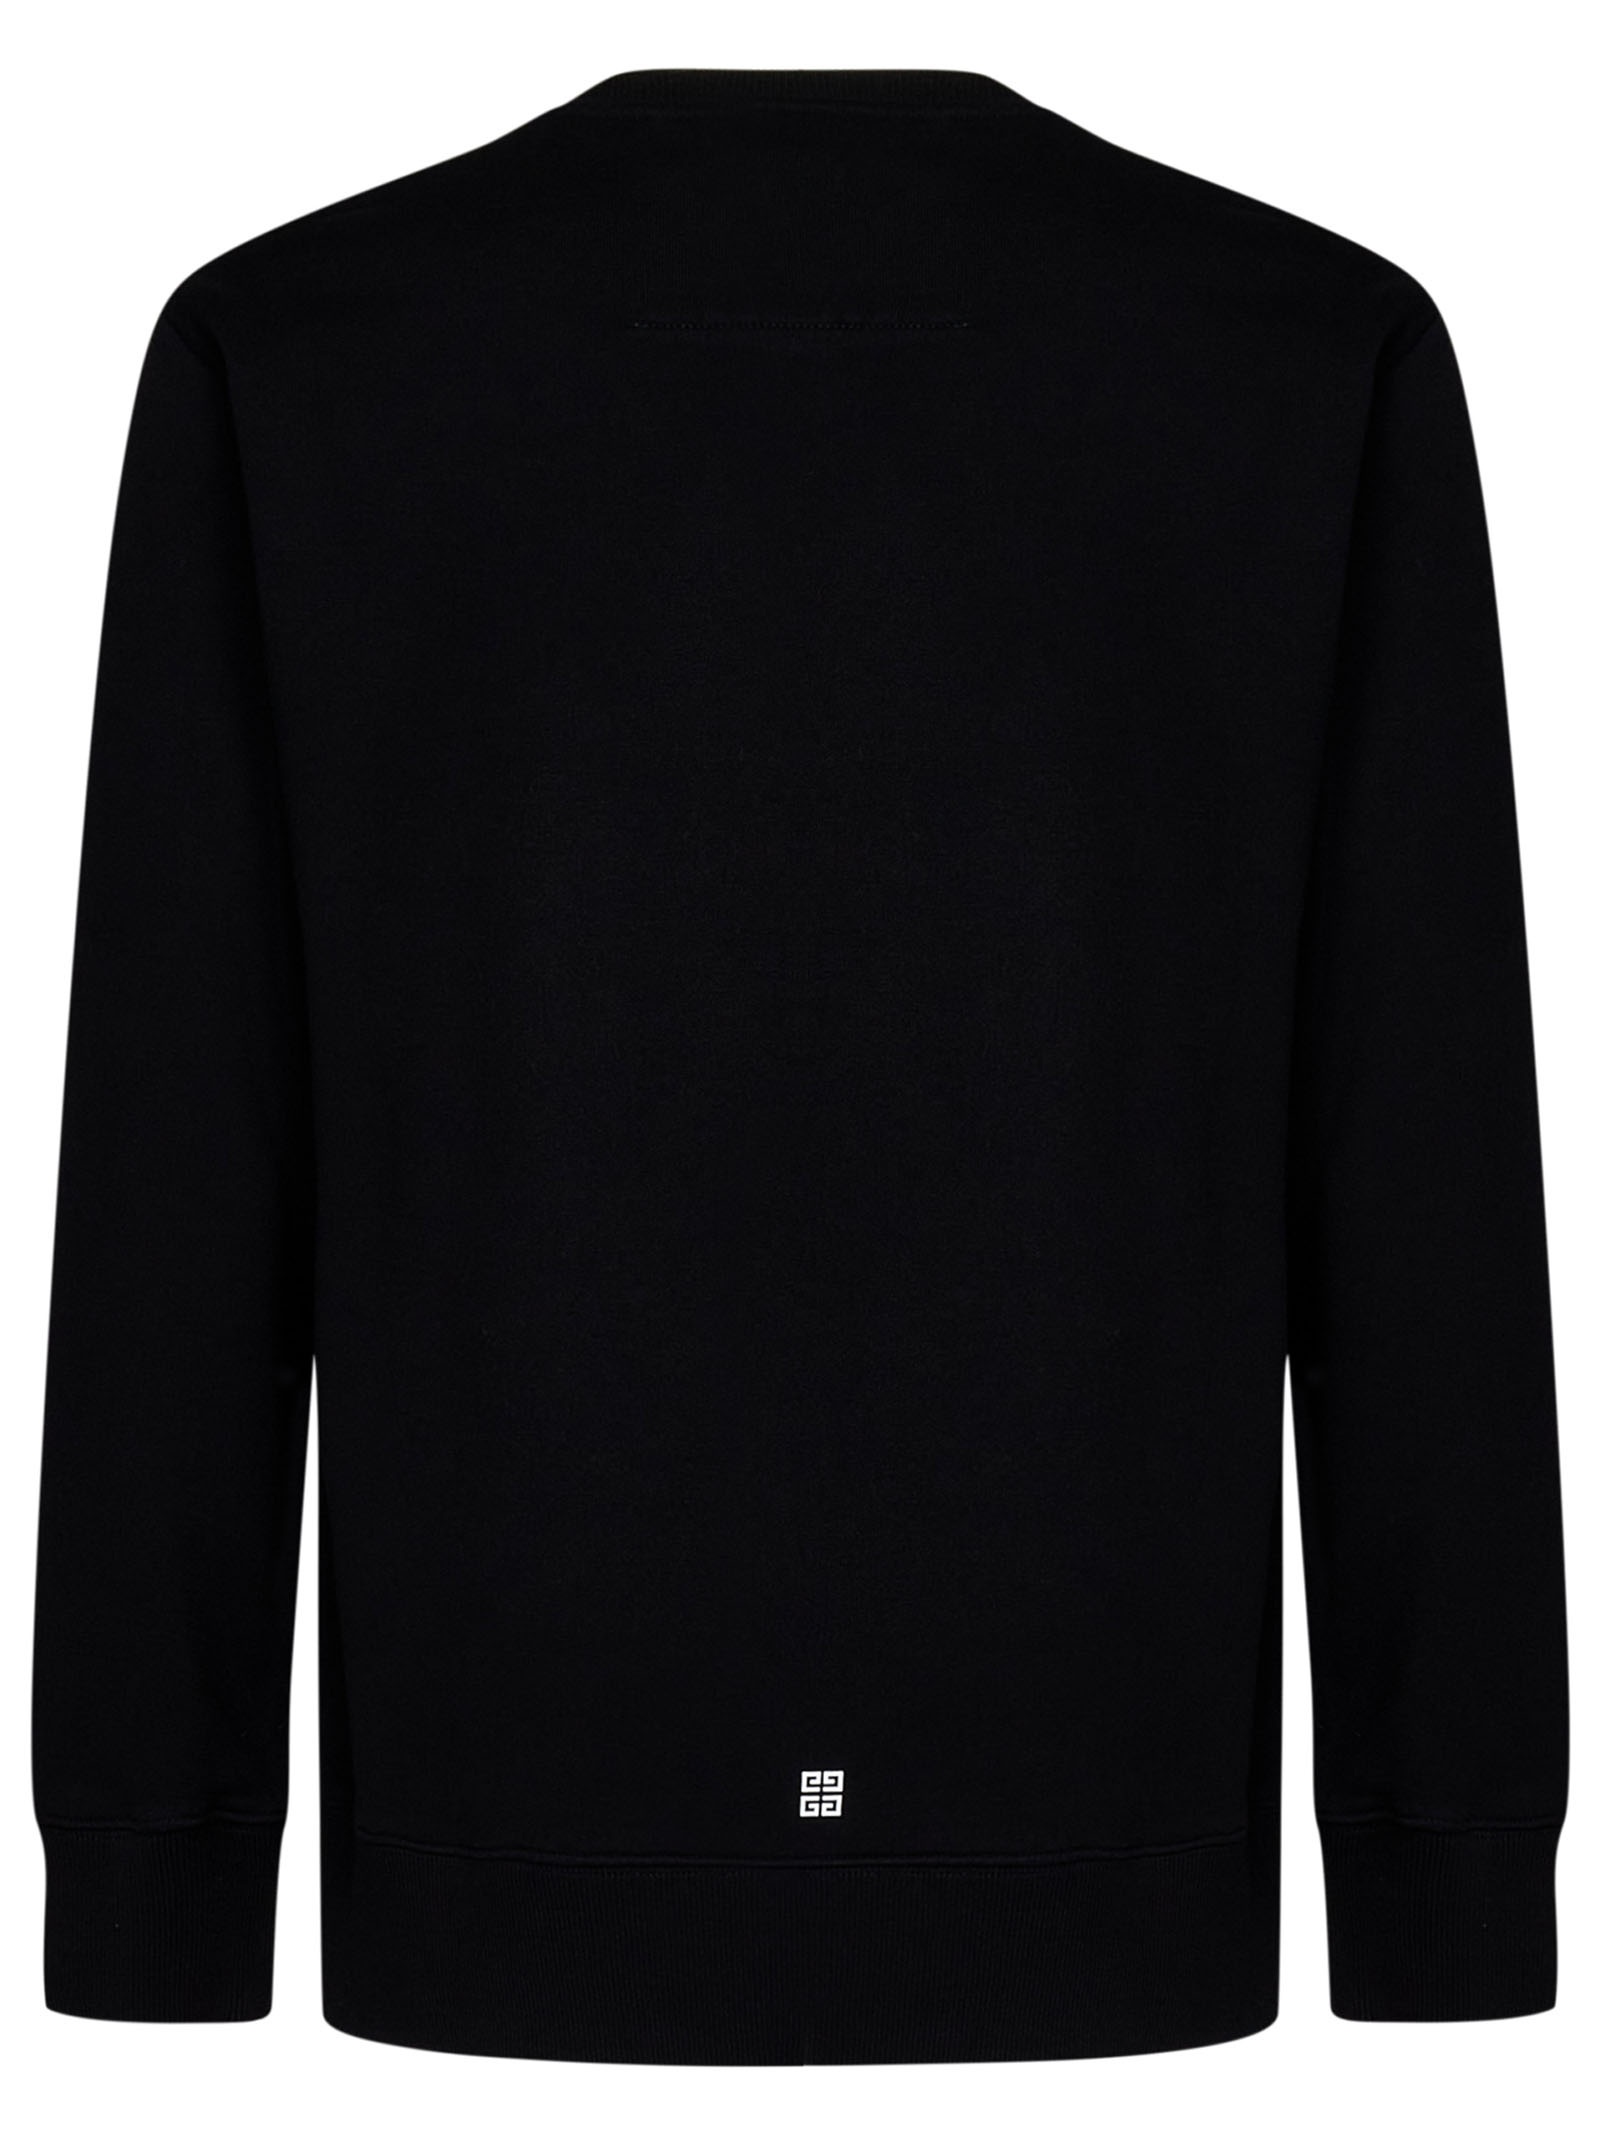 Black slim-fit brushed cotton sweatshirt with white signature printed at front. - 2